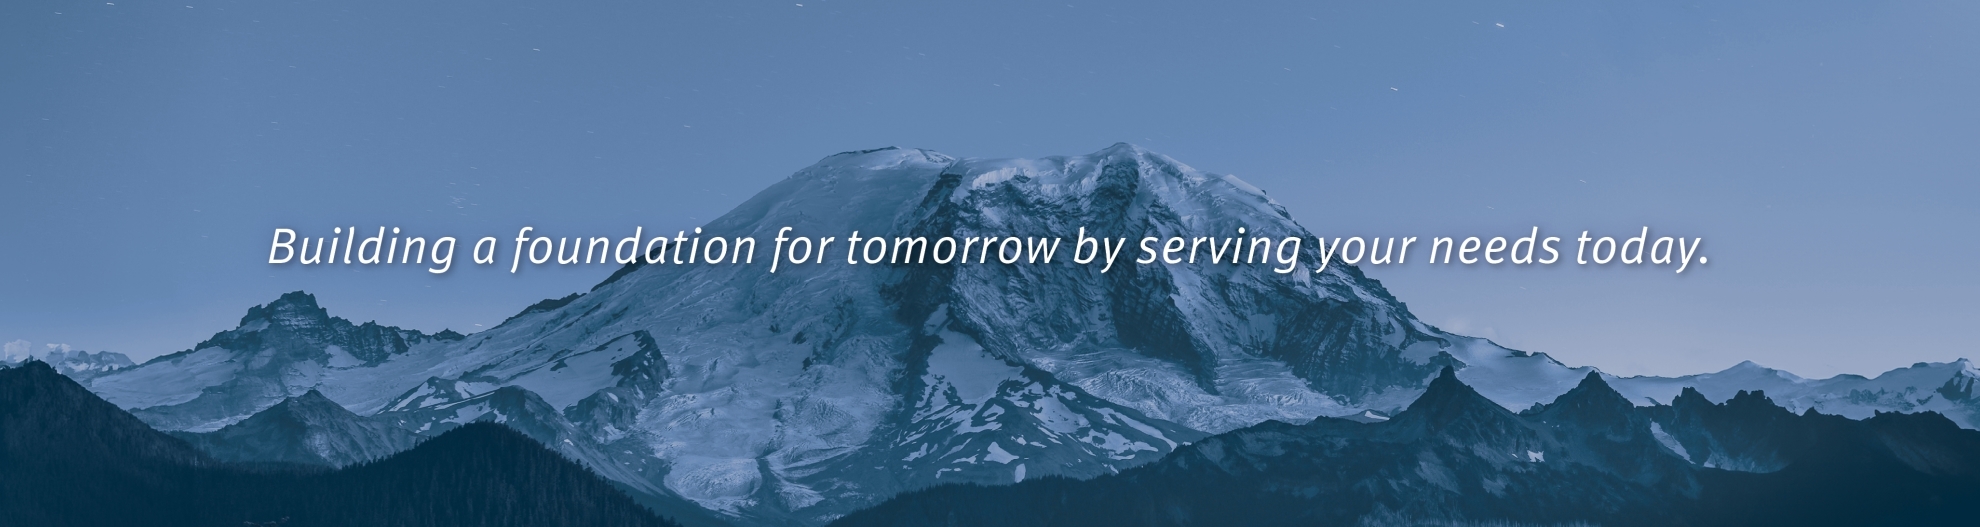 Building a foundation for tomorrow by serving your needs today.